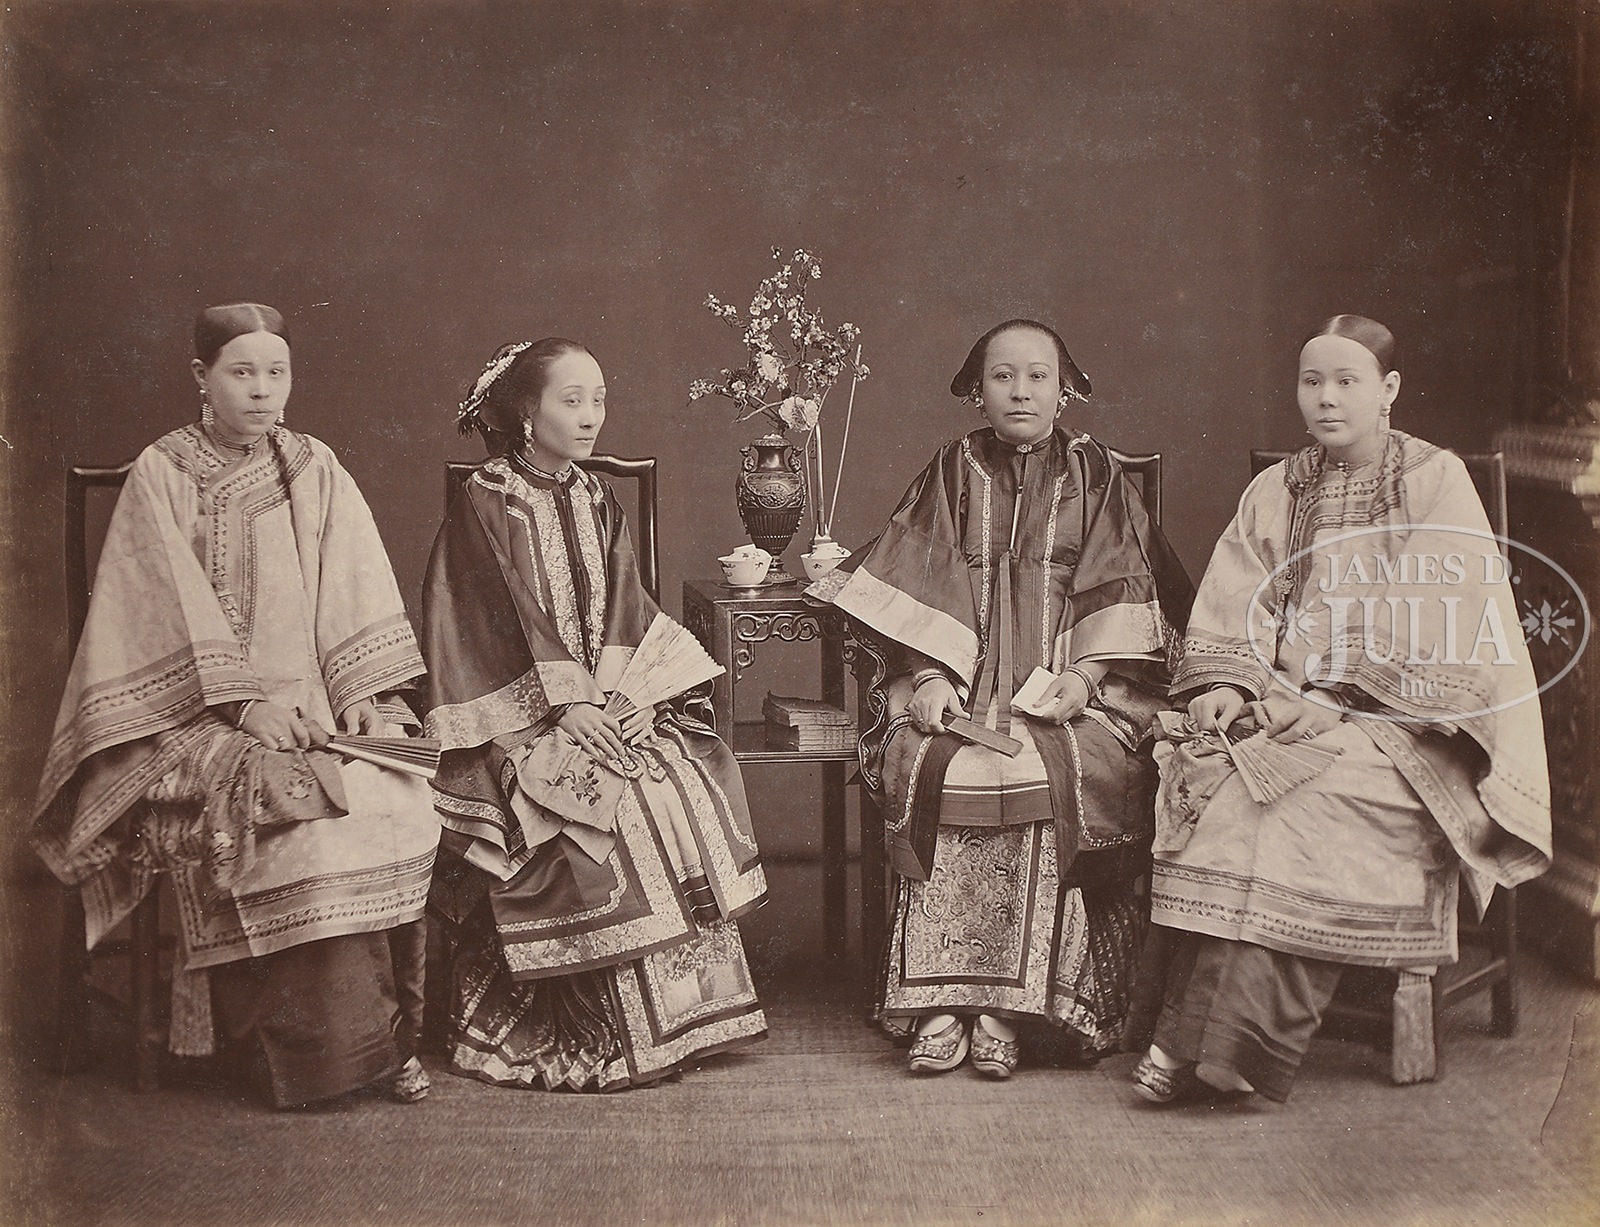 EXTRAORDINARY & MASSIVE LIFE LONG COLLECTION OF RARE ASIAN PHOTOGRAPHS AMASSED BY DR. HELGA WALL- - Image 8 of 222